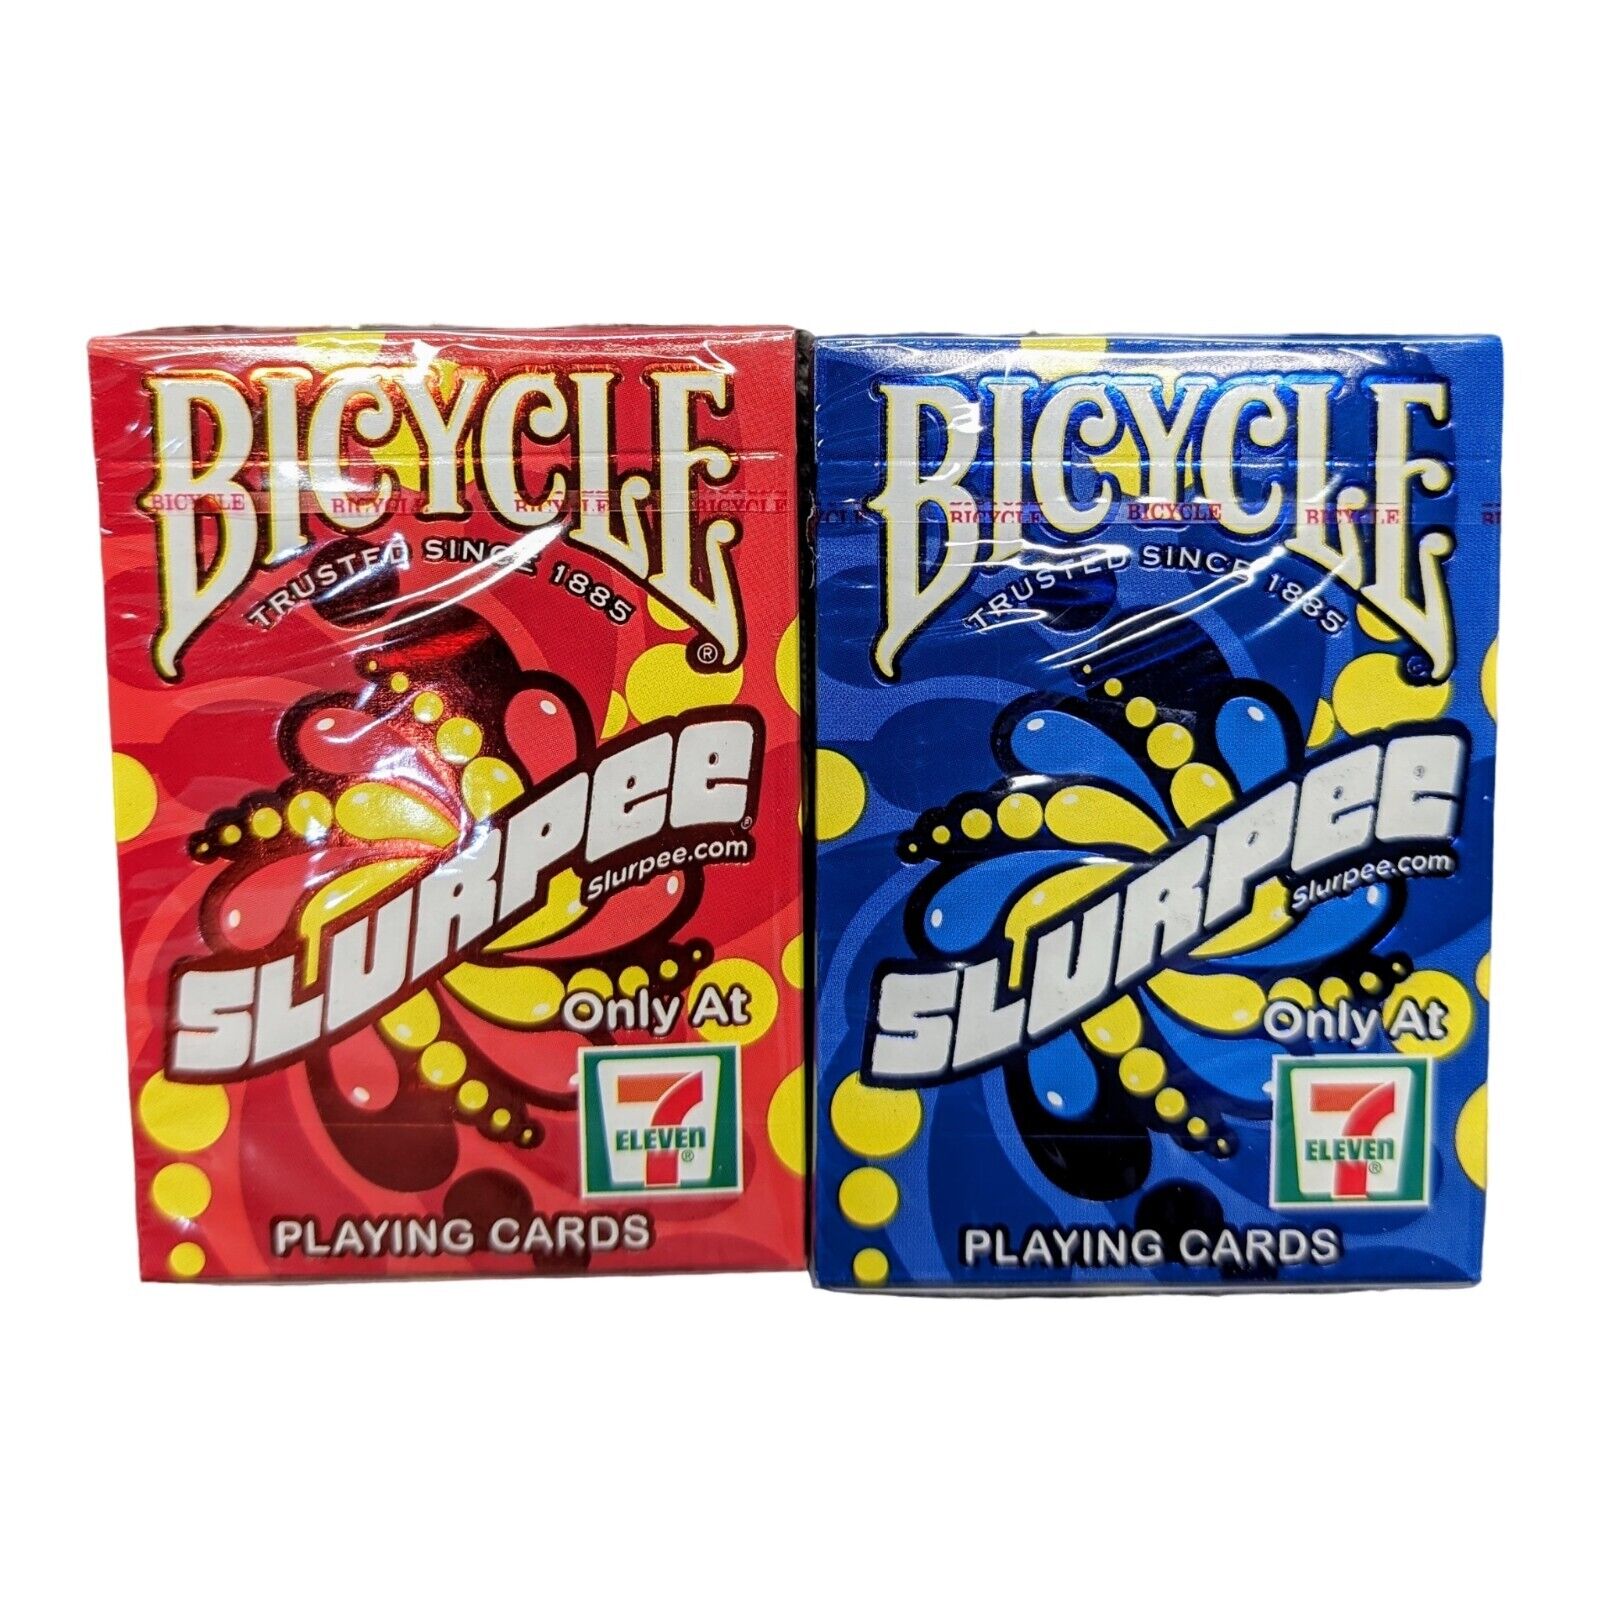 (2) Bicycle 7-Eleven Slurpee 2020 Red & Blue Playing Cards NEW SHIPS FAST